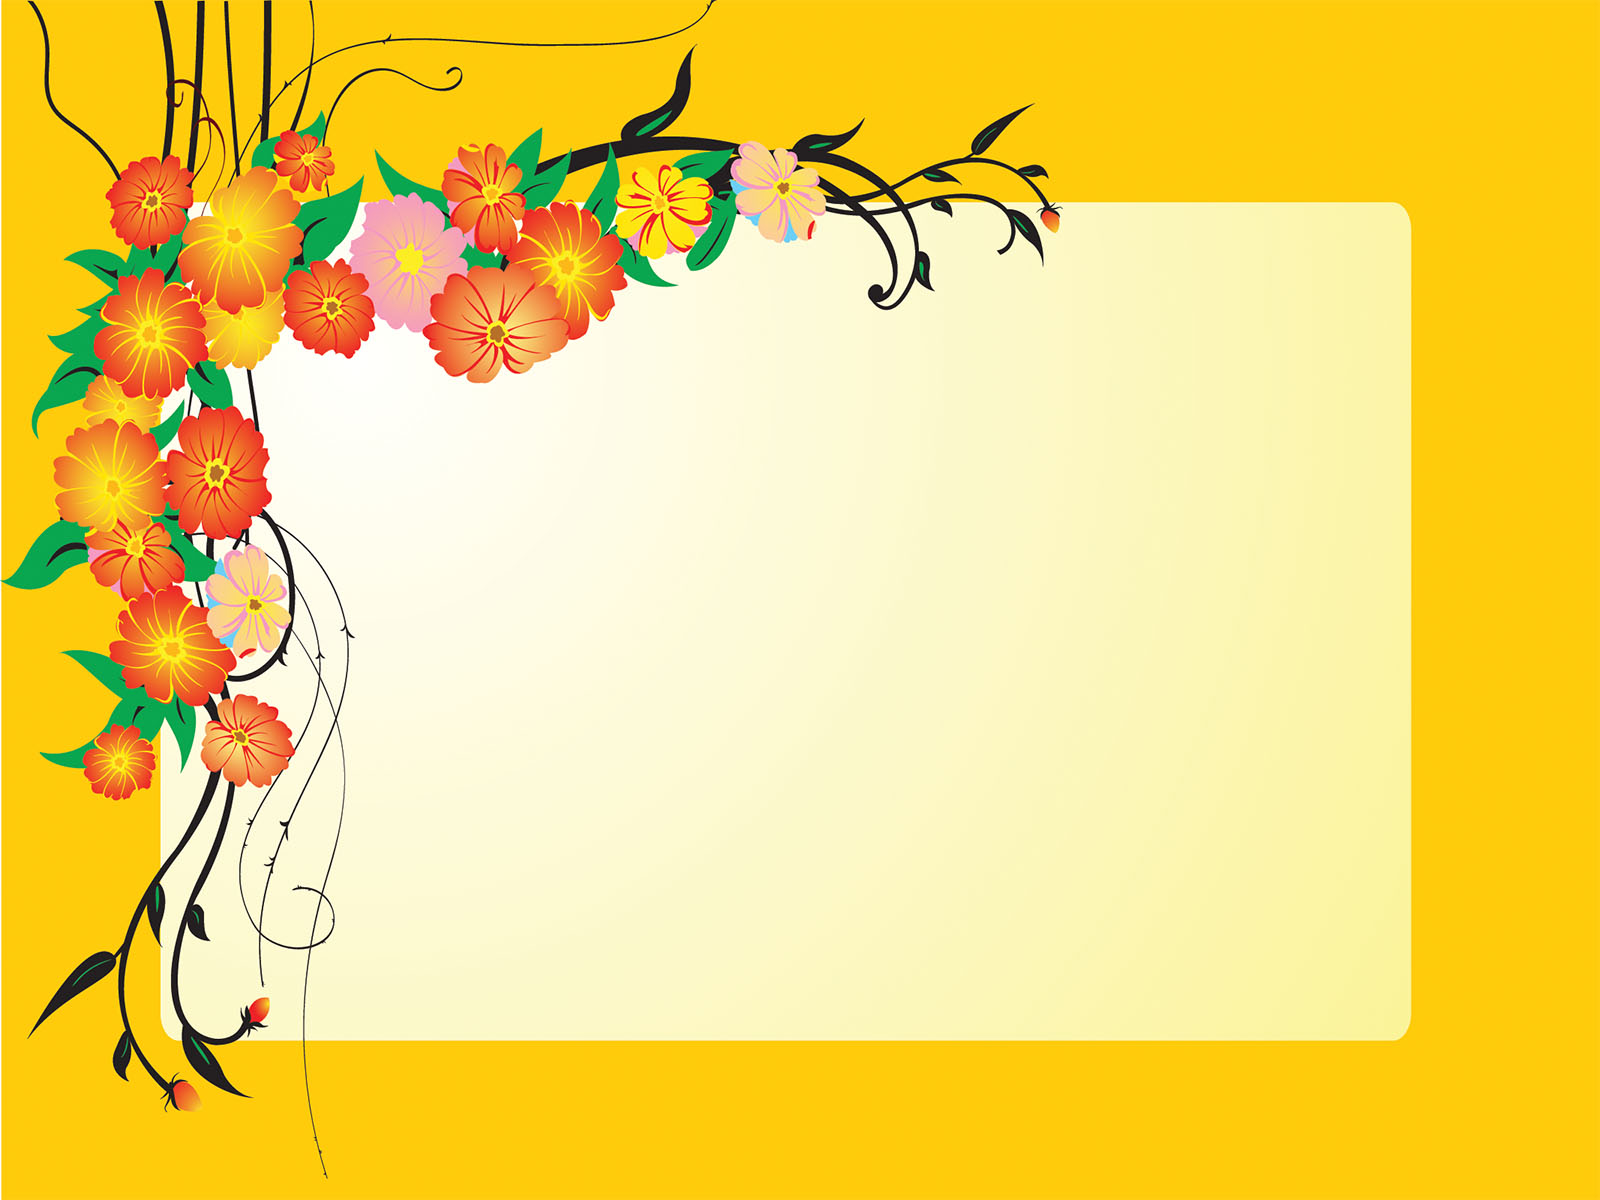 Orange Flowers on Yellow Powerpoint Templates - Flowers - Free PPT  Backgrounds and Templates